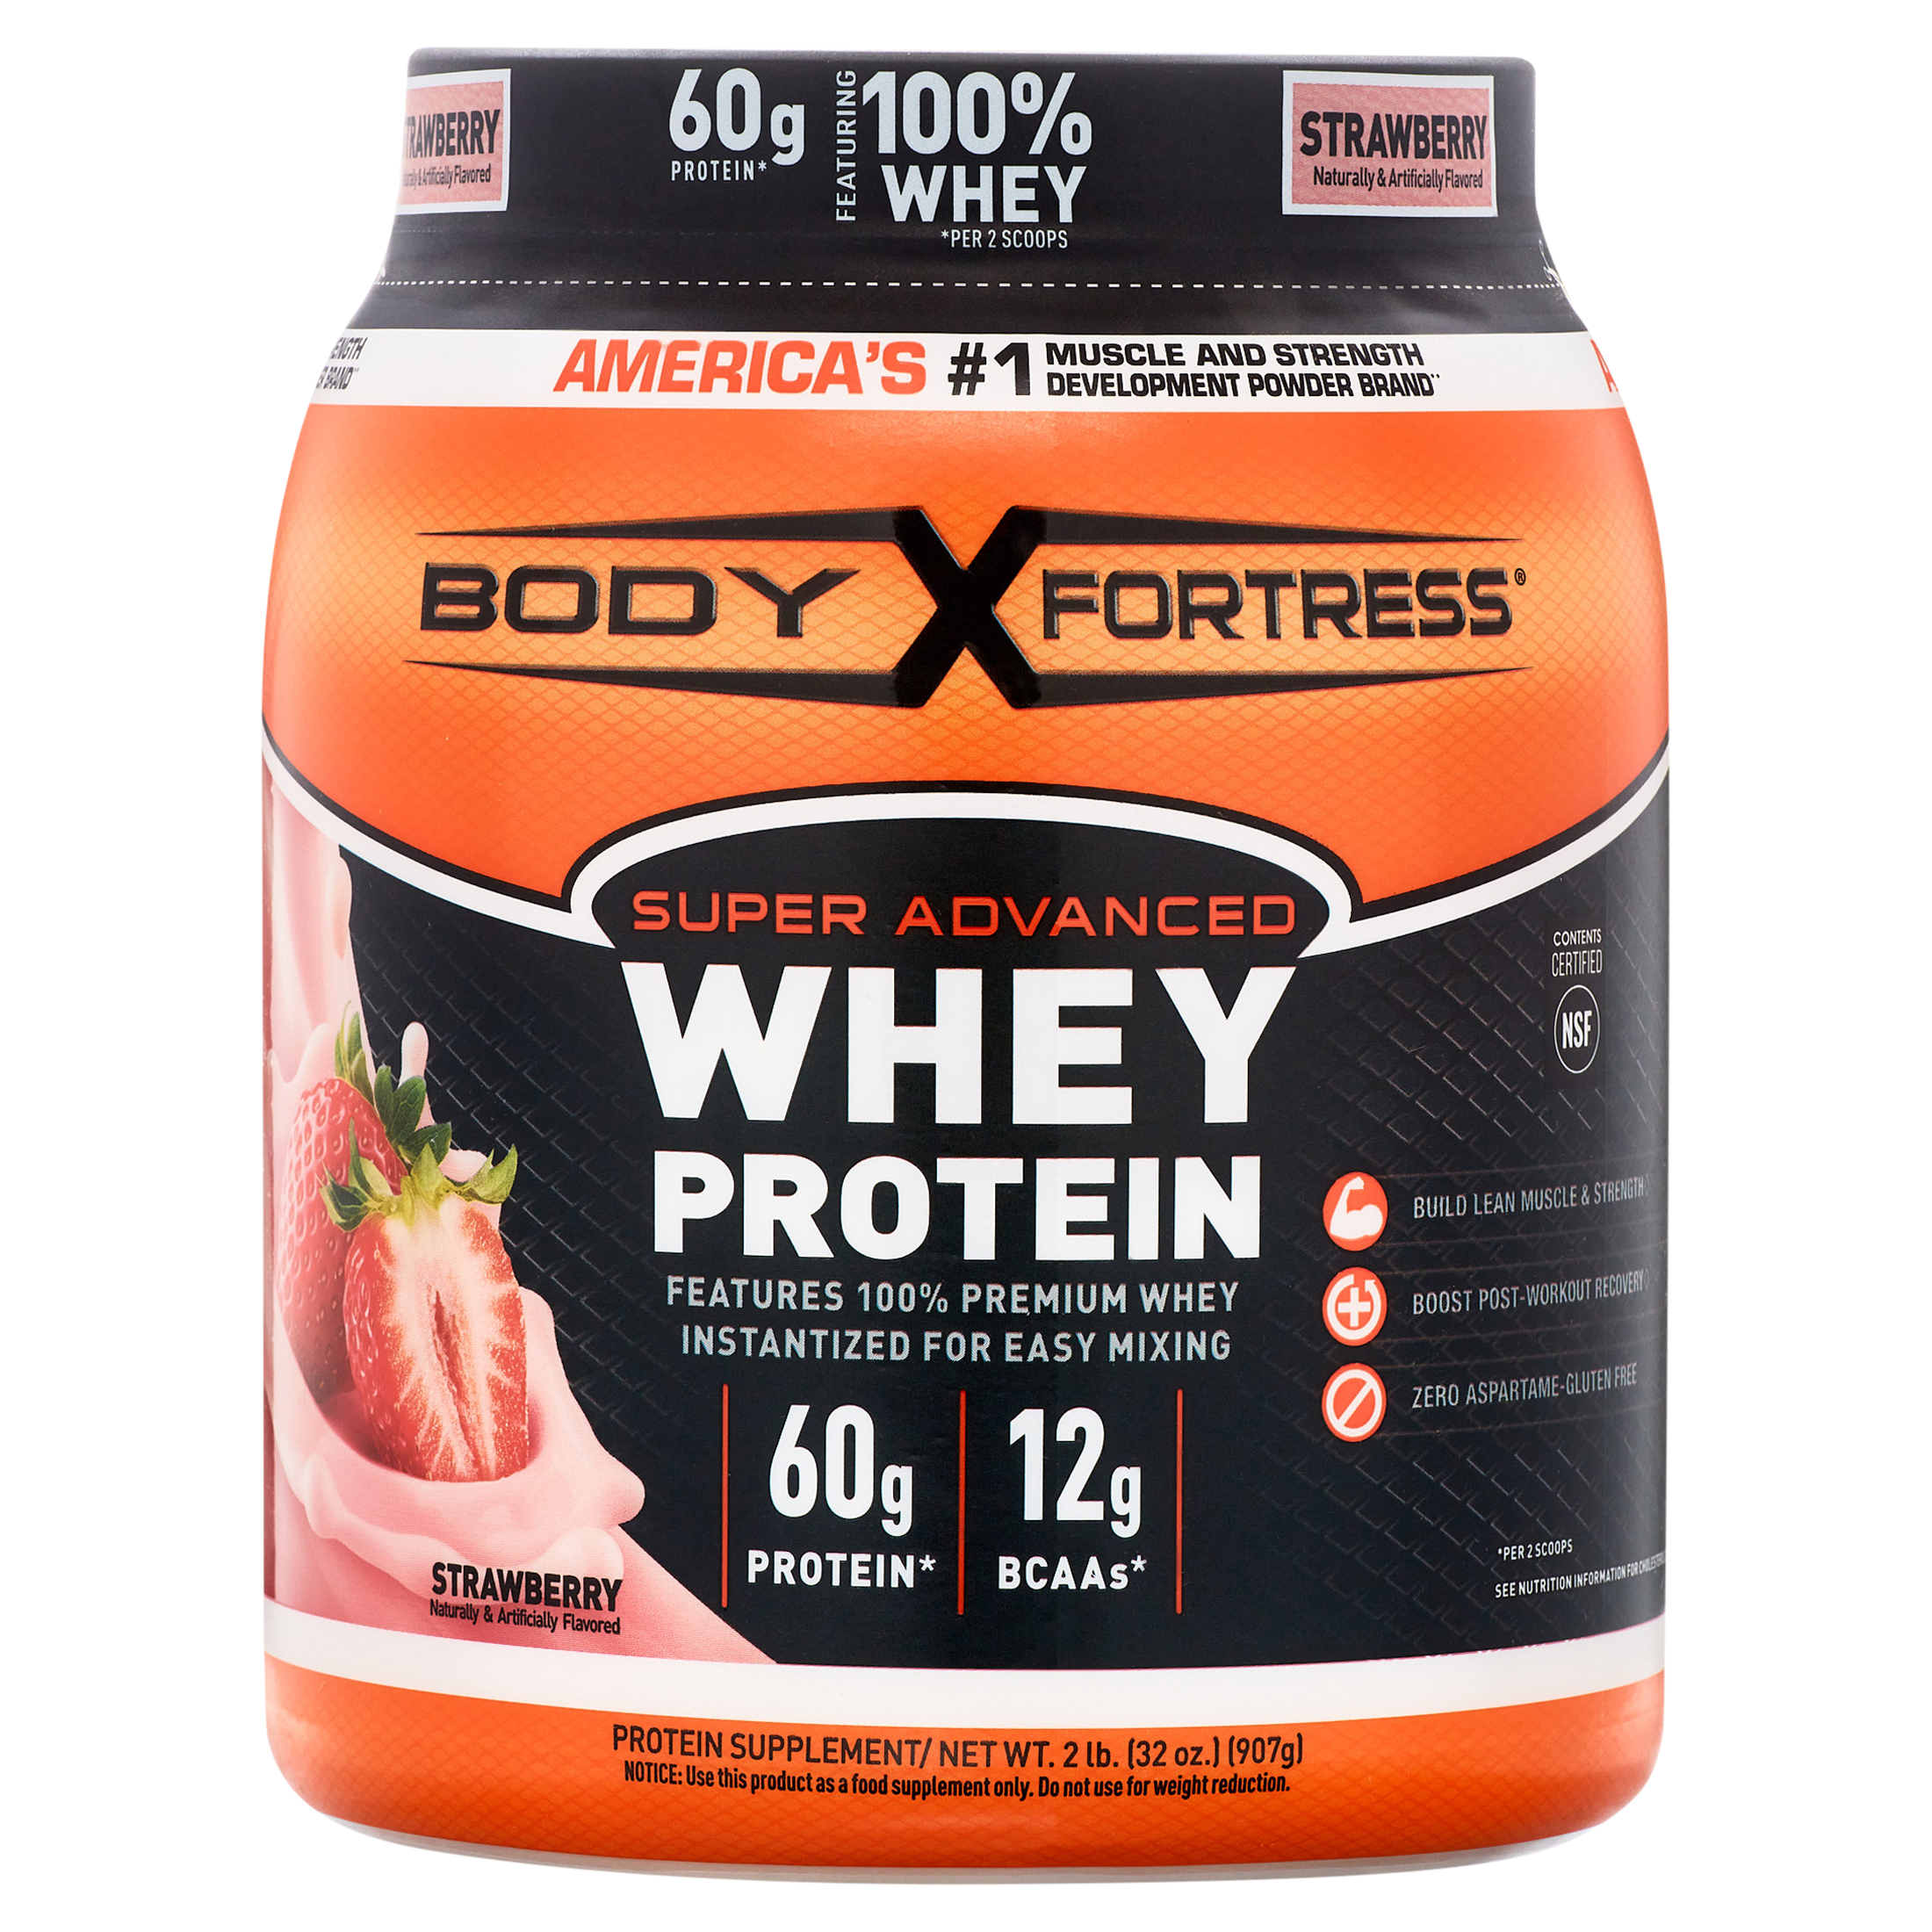 Body Fortress Whey Protein Powder, Strawberry Flavored, Gluten Free, 60 G Protein Per Serving, 2 Lbs - image 1 of 7